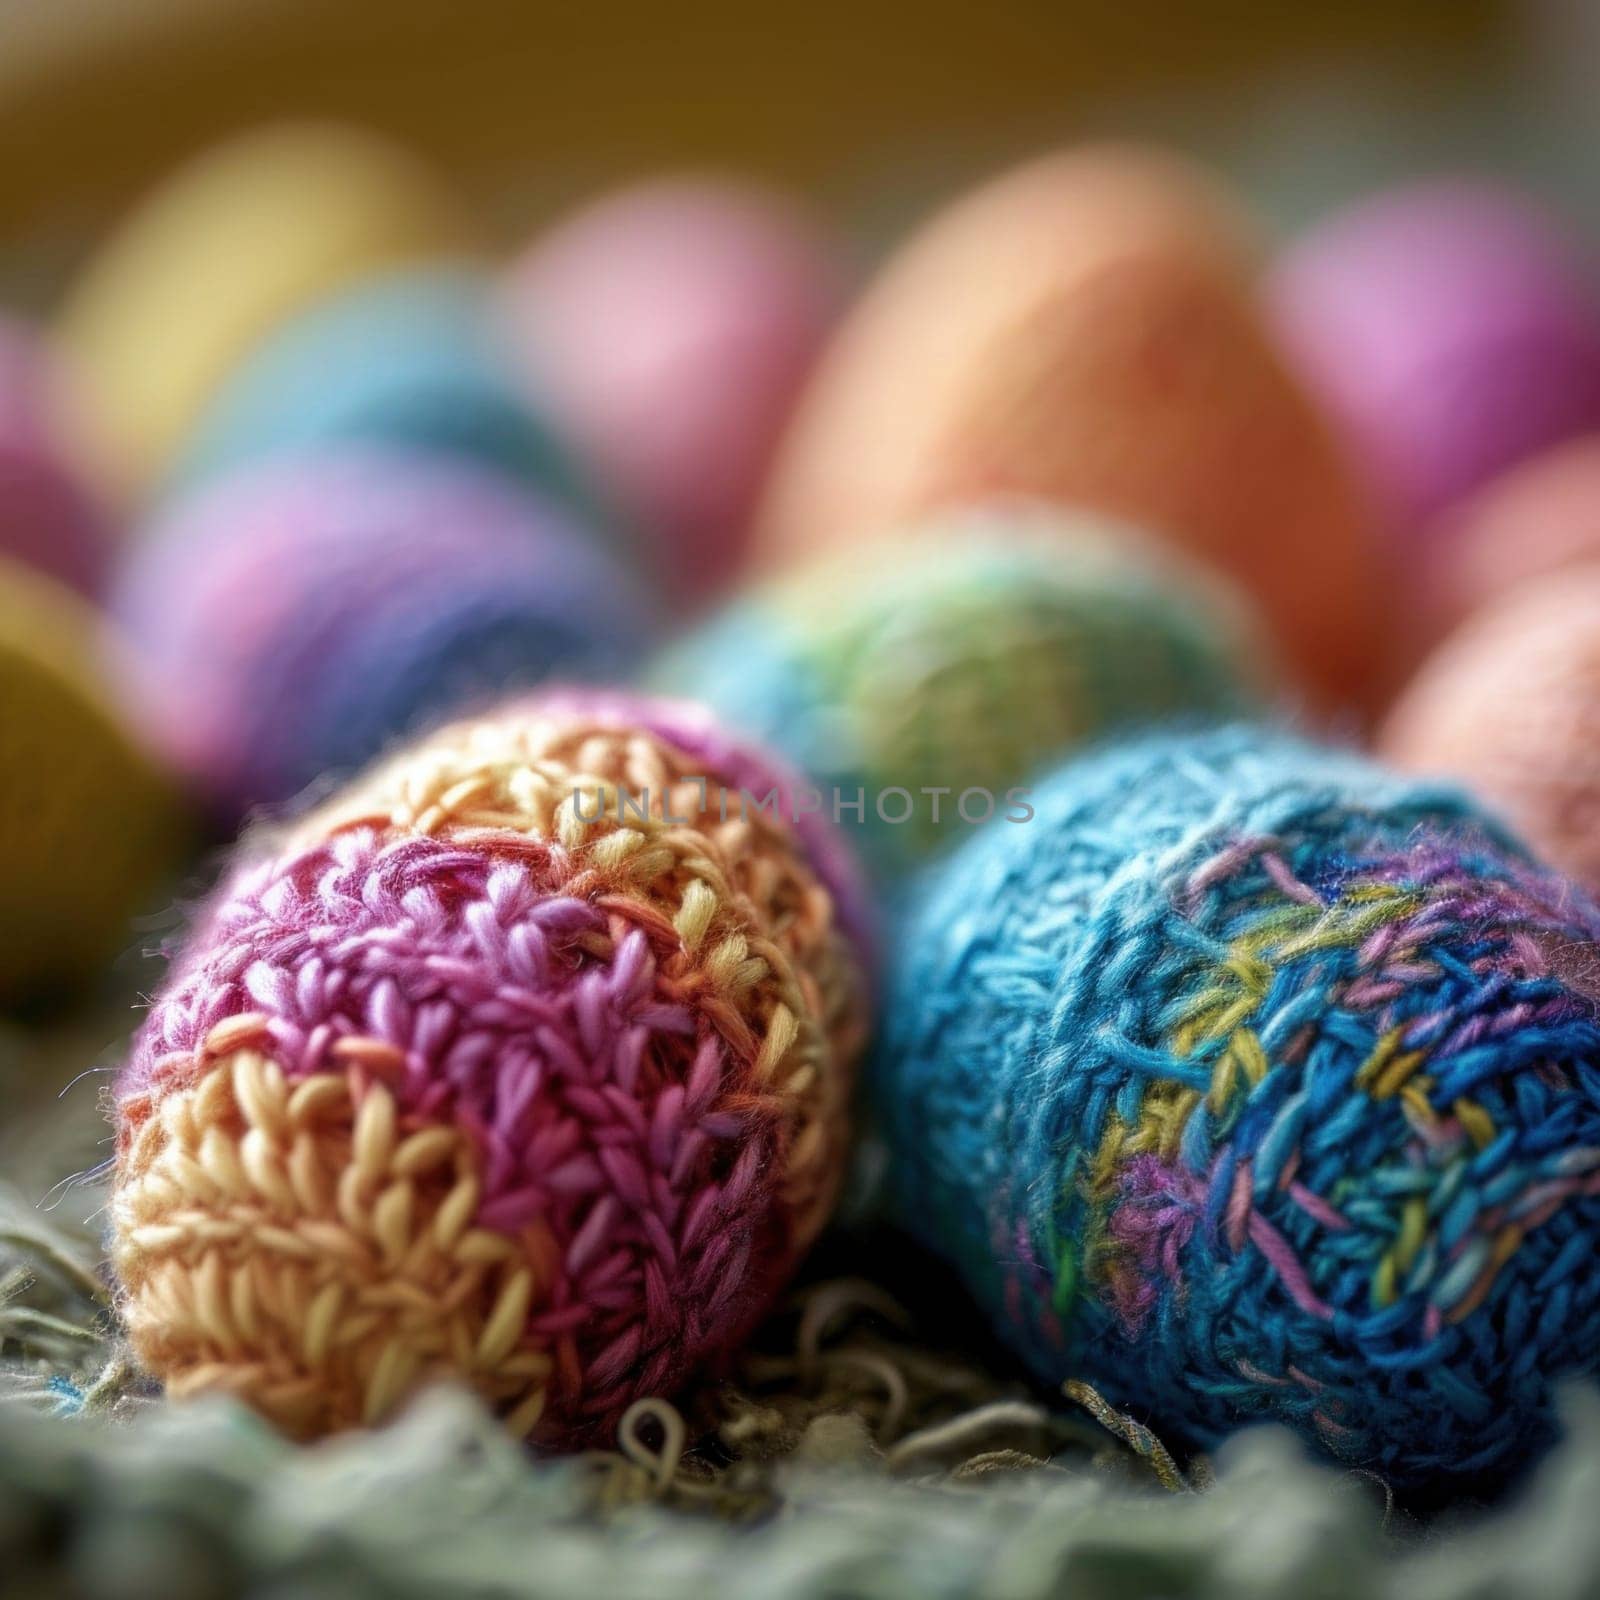 A close up of a bunch of colorful eggs laying on top of each other